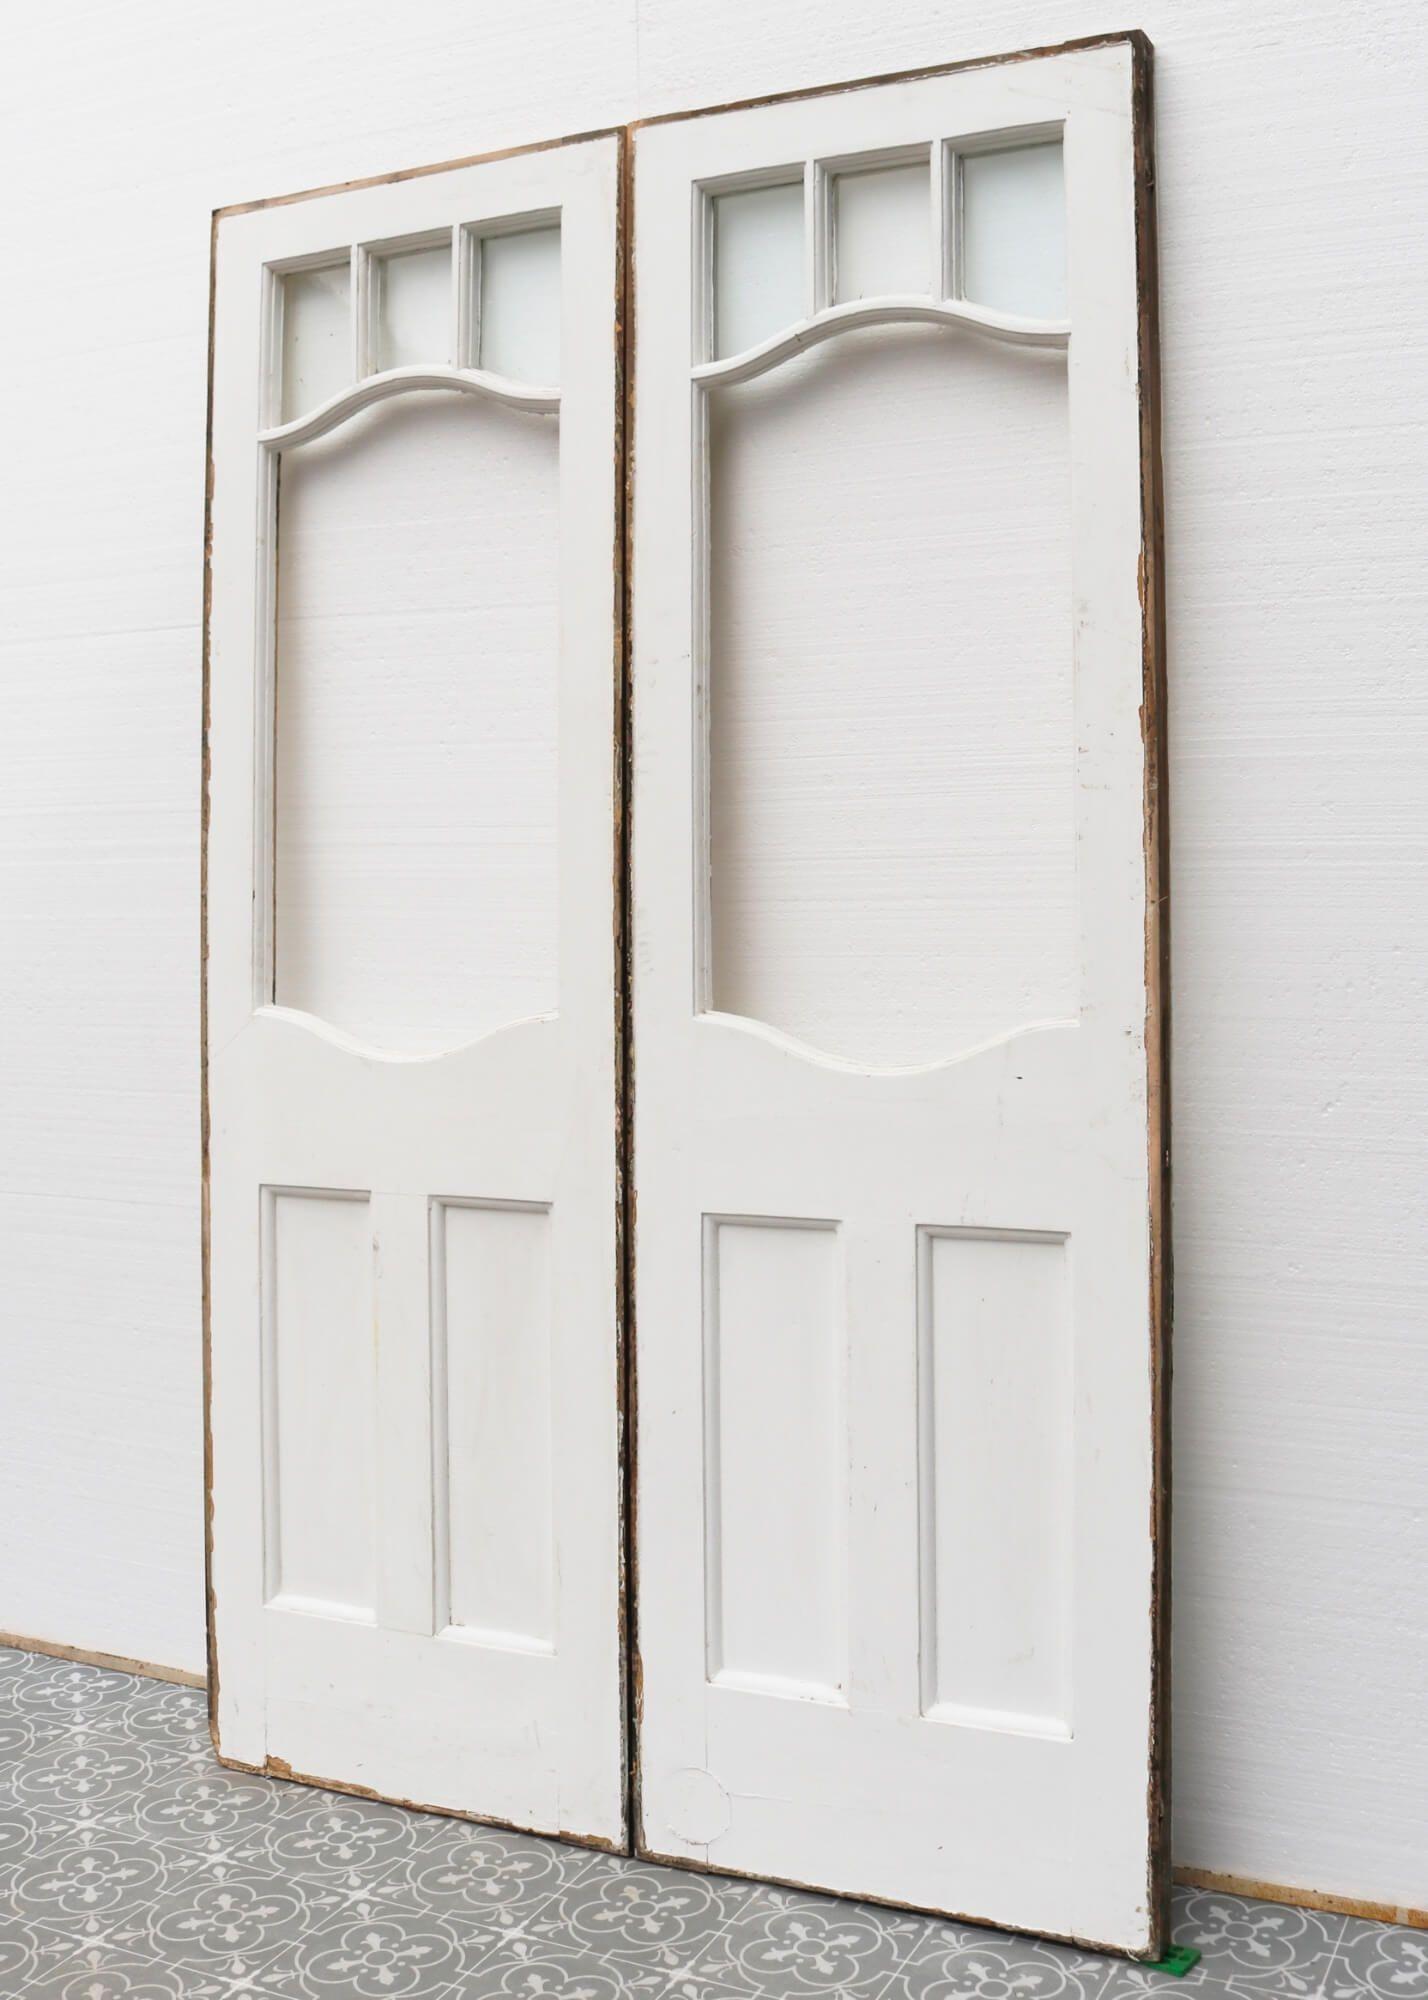 English Glazed Victorian Internal or External Double Doors For Sale